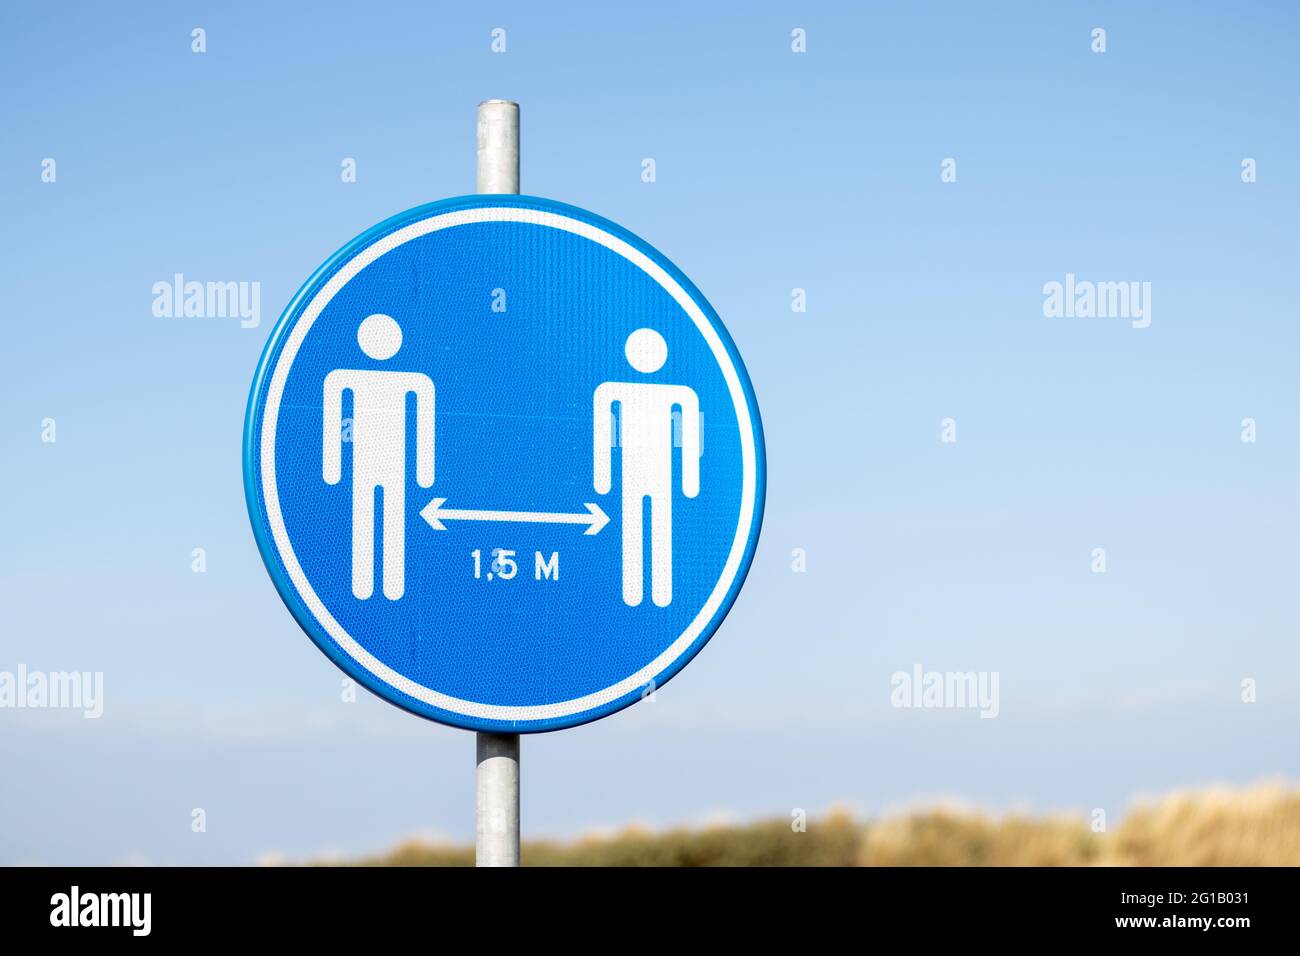 6ft High Resolution Stock Photography and Images - Alamy